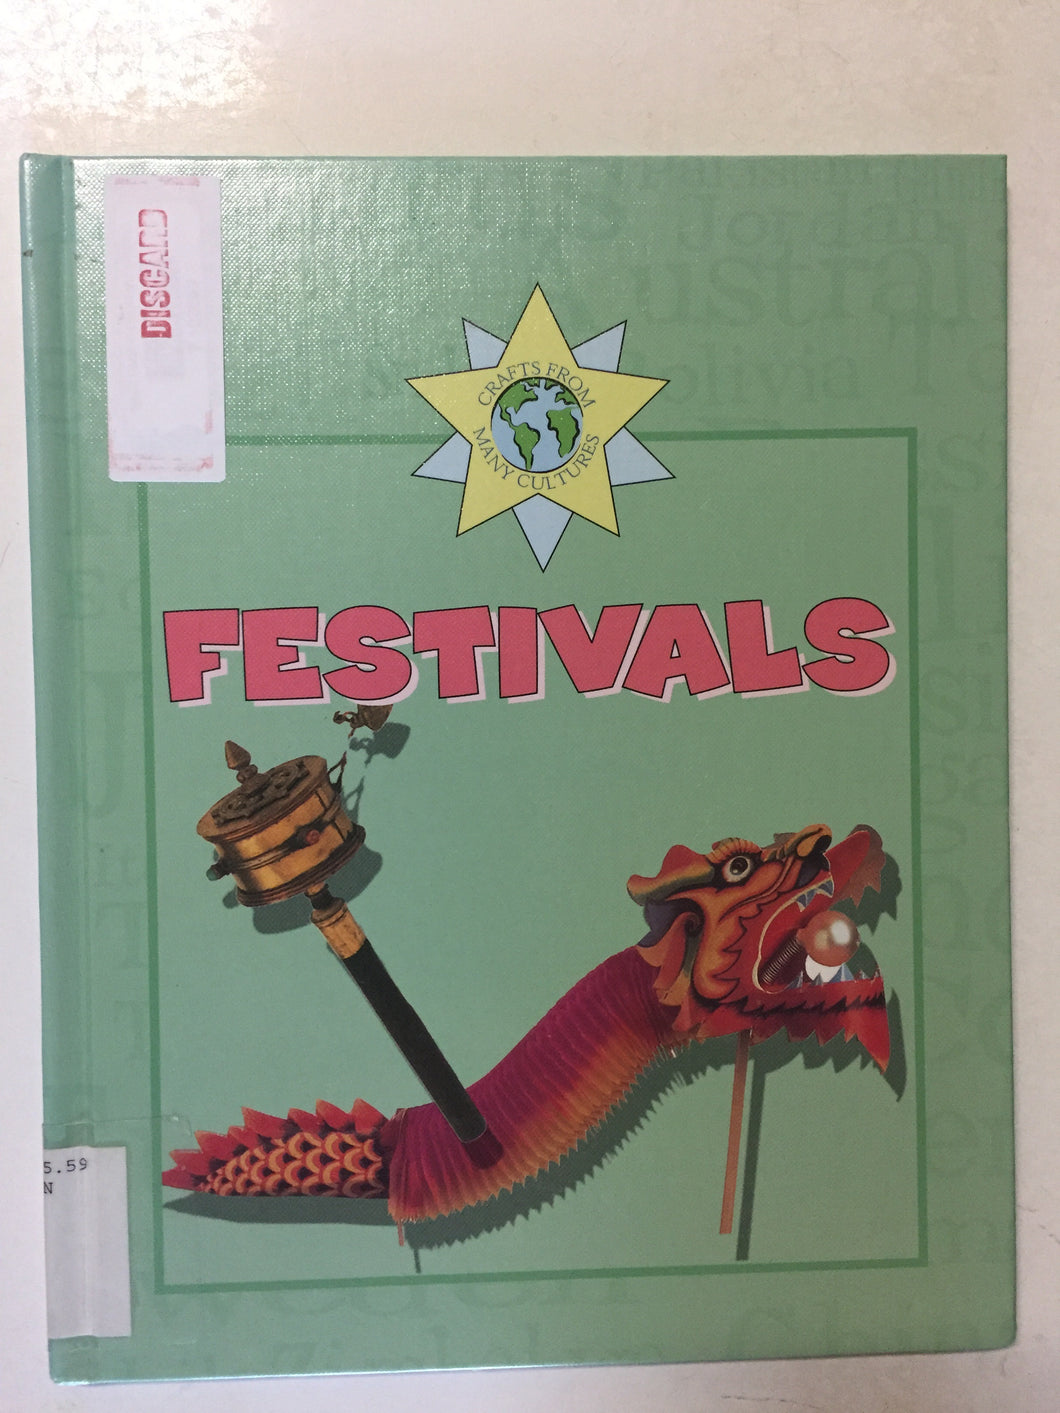 Festivals Crafts From Many Cultures - Slick Cat Books 